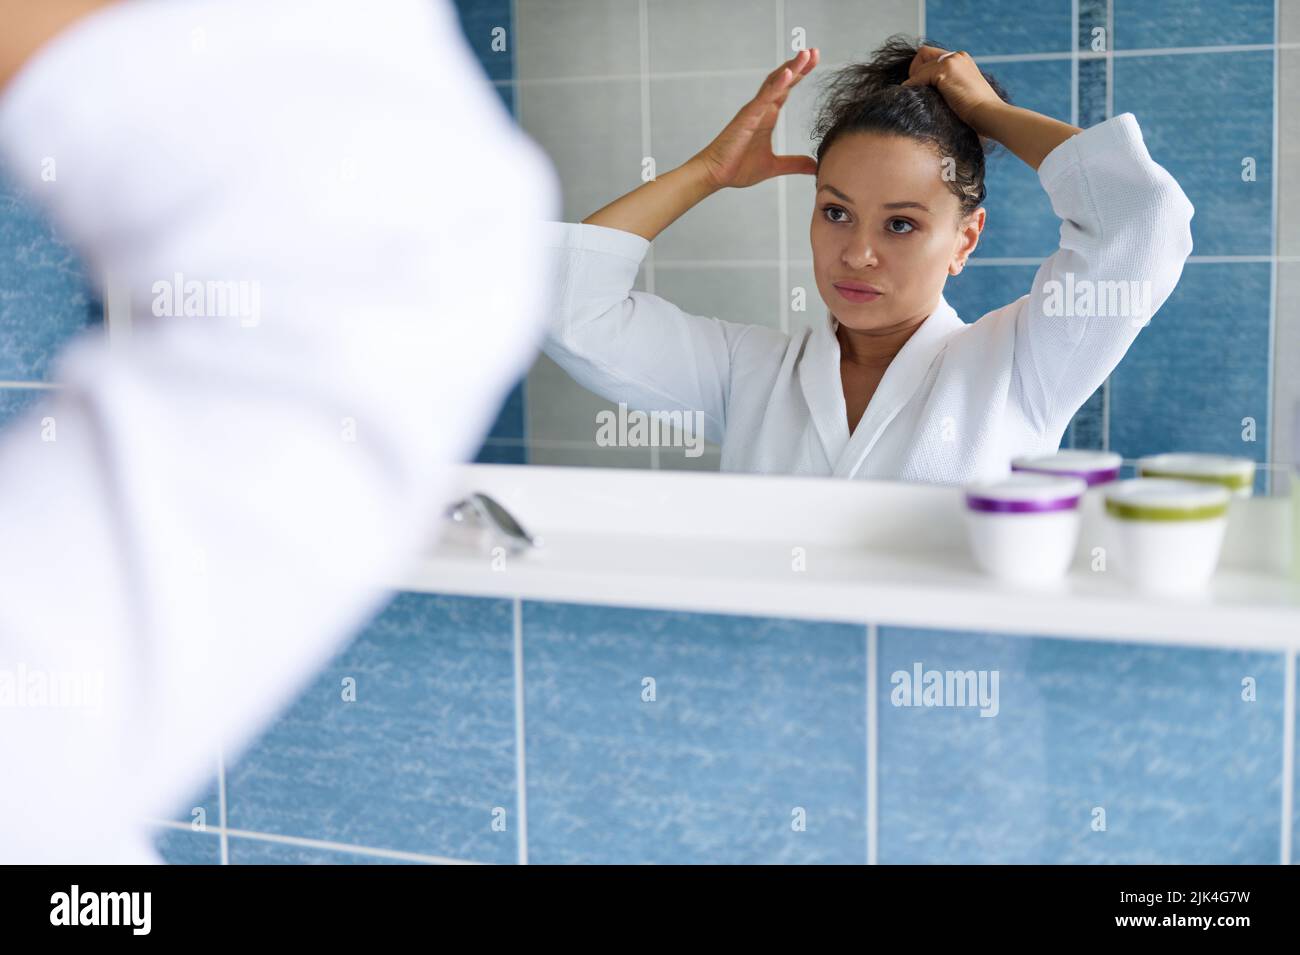 Pretty dark-haired Hispanic woman in white bathrobe ties her ponytail and looks at her reflection in the bathroom mirror Stock Photo